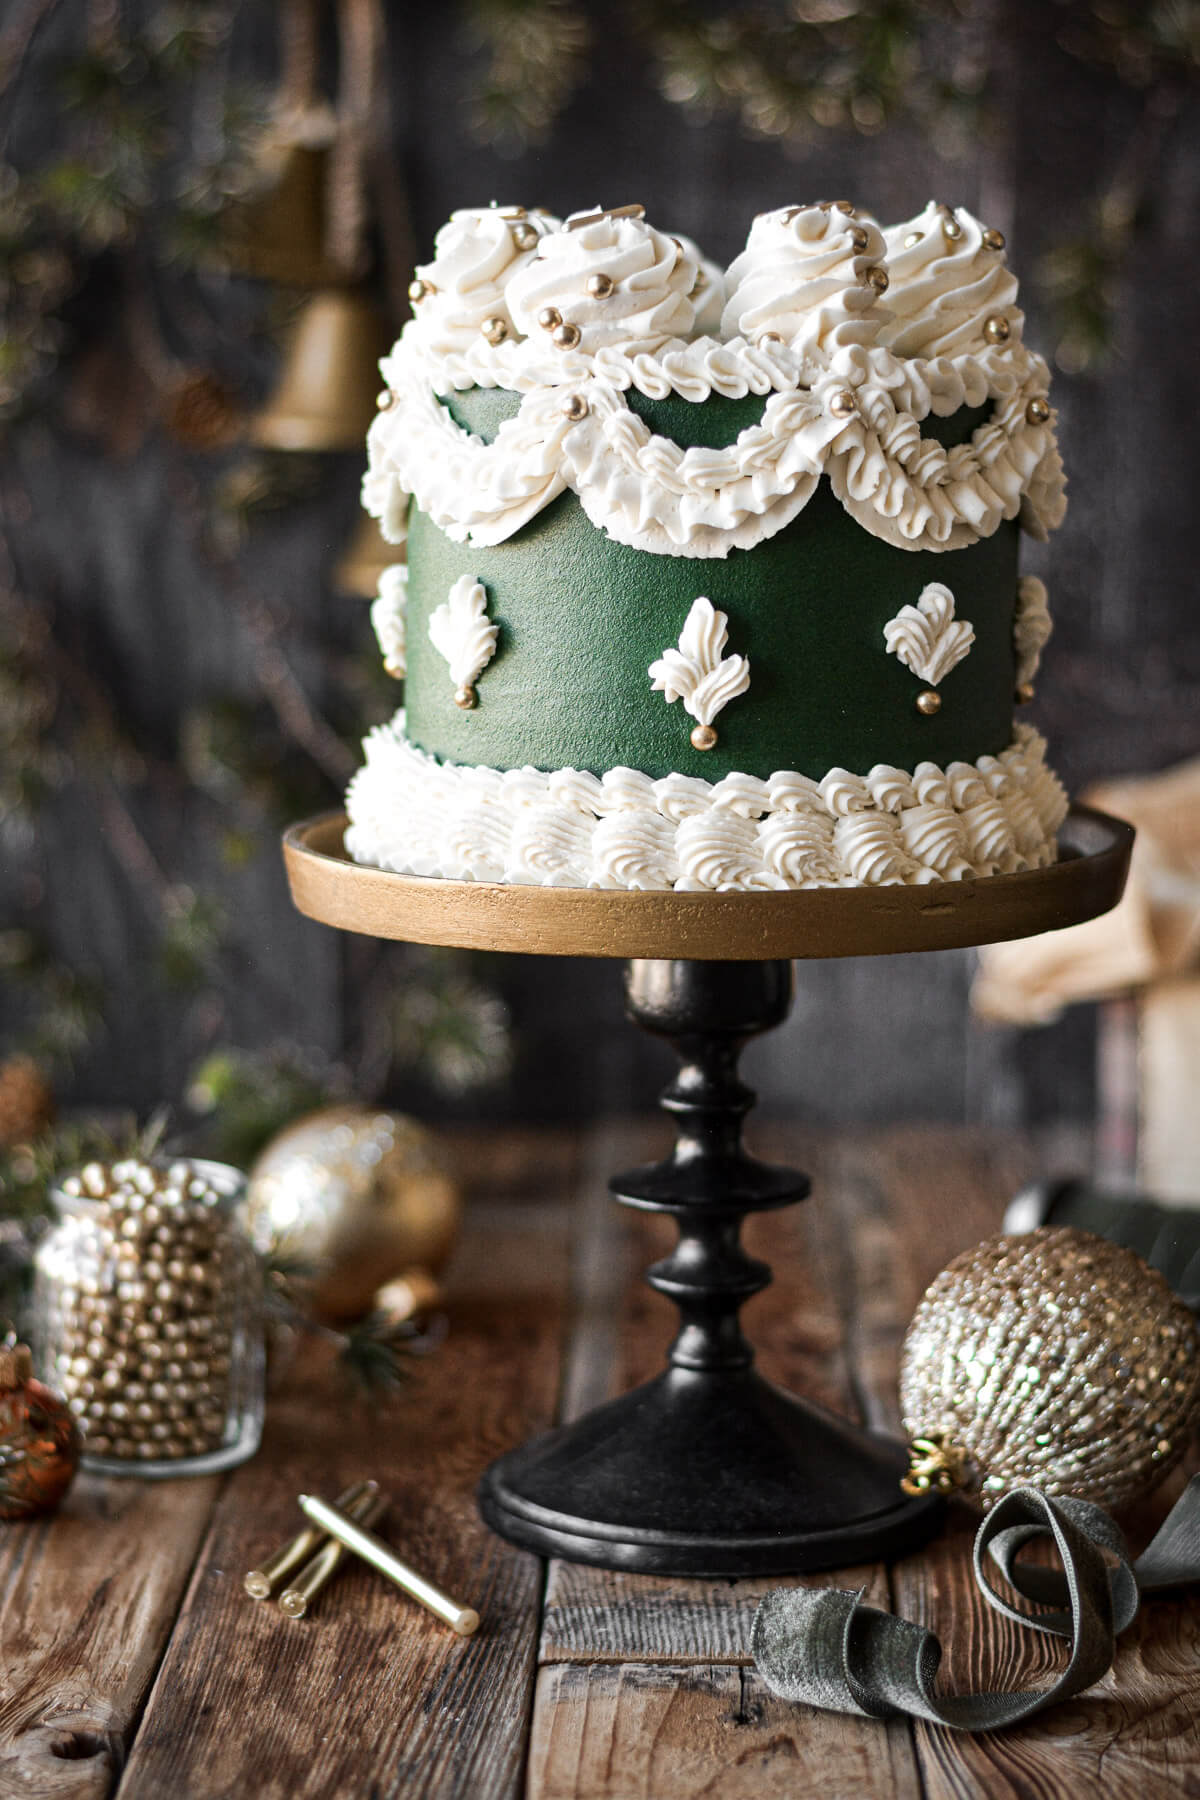 A green frosted Christmas cake with elaborate white piping, on a bronze and black cake stand.